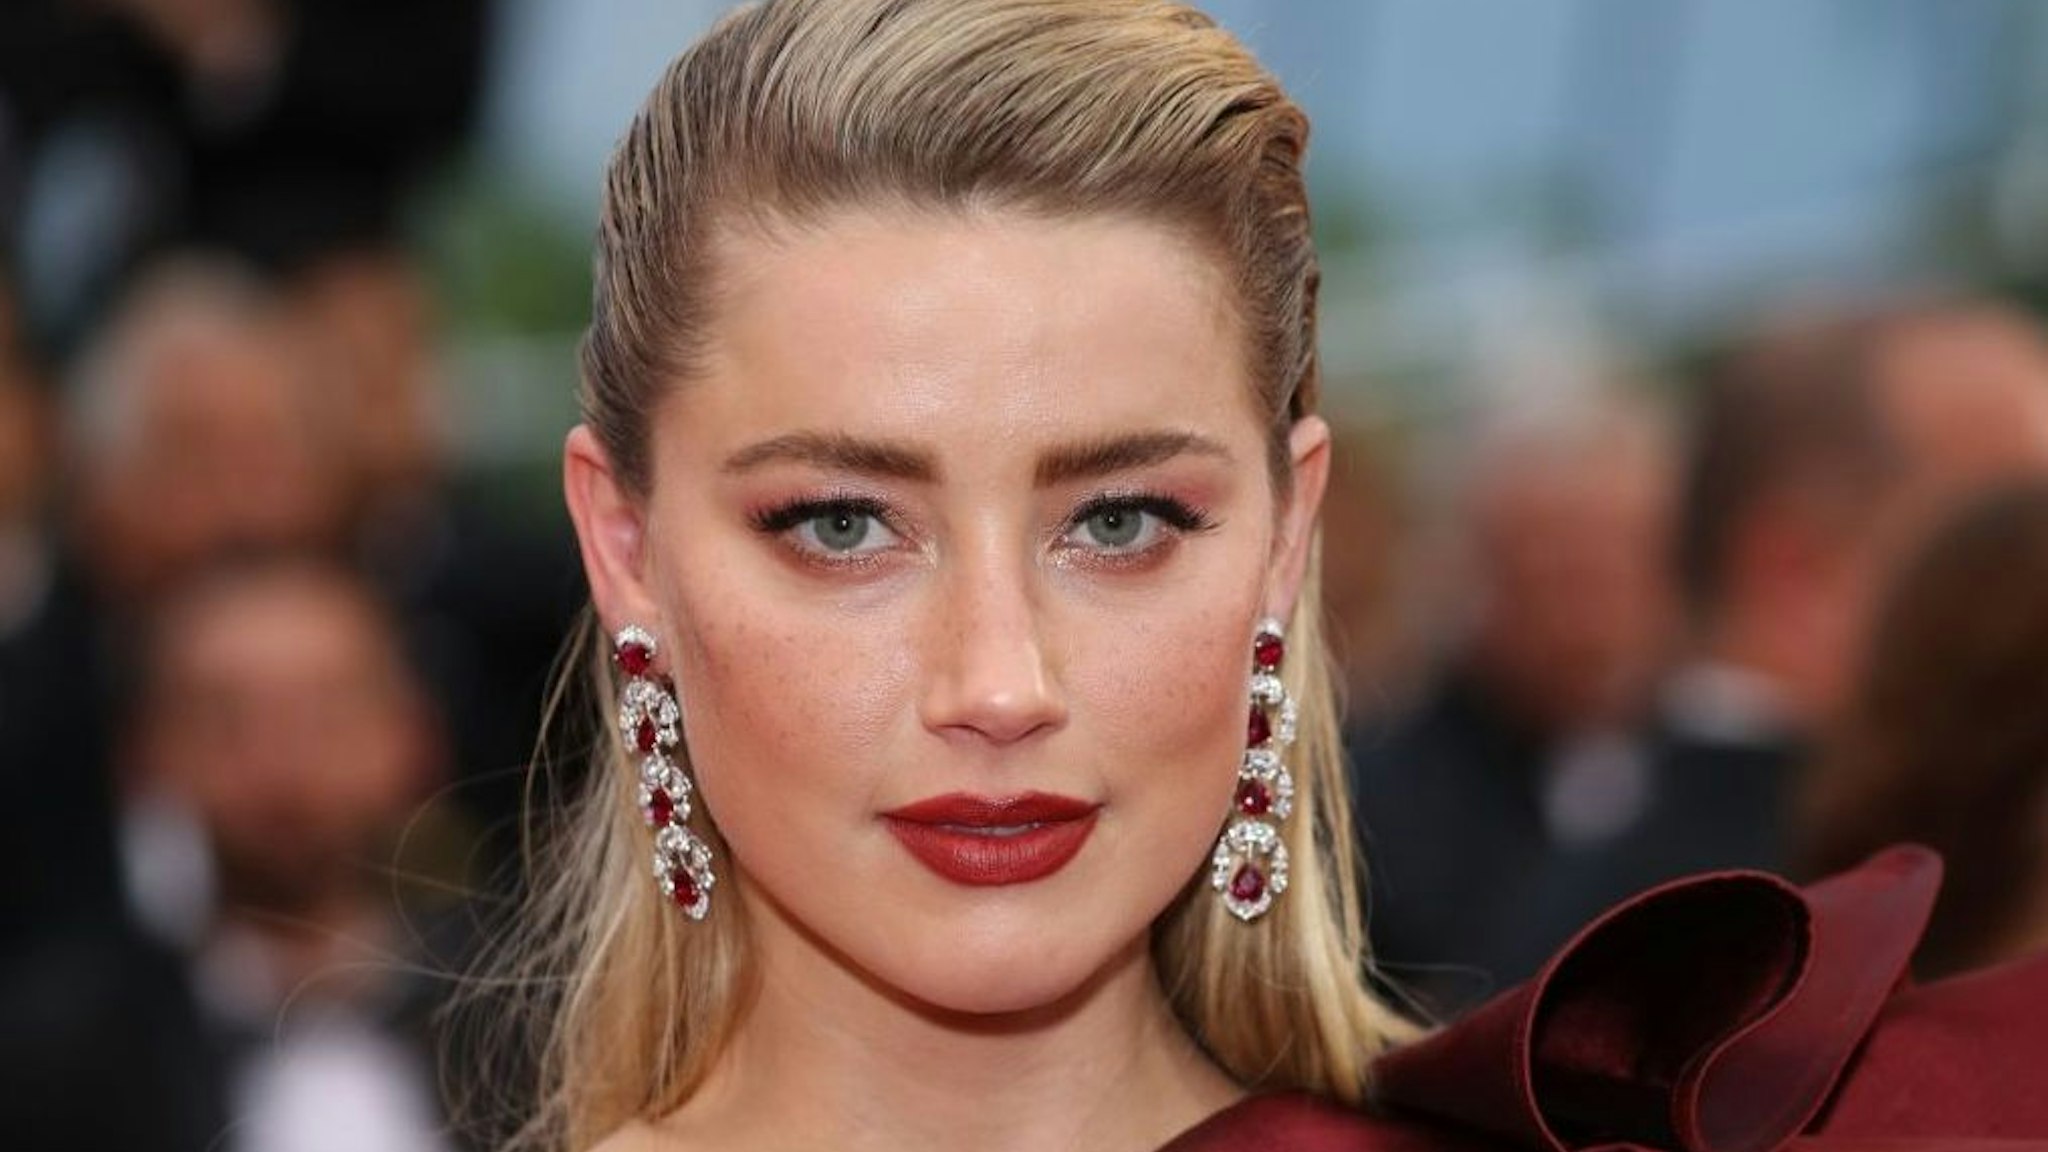 US actress Amber Heard arrives for the screening of the film "Dolor Y Gloria (Pain and Glory)" at the 72nd edition of the Cannes Film Festival in Cannes, southern France, on May 17, 2019.